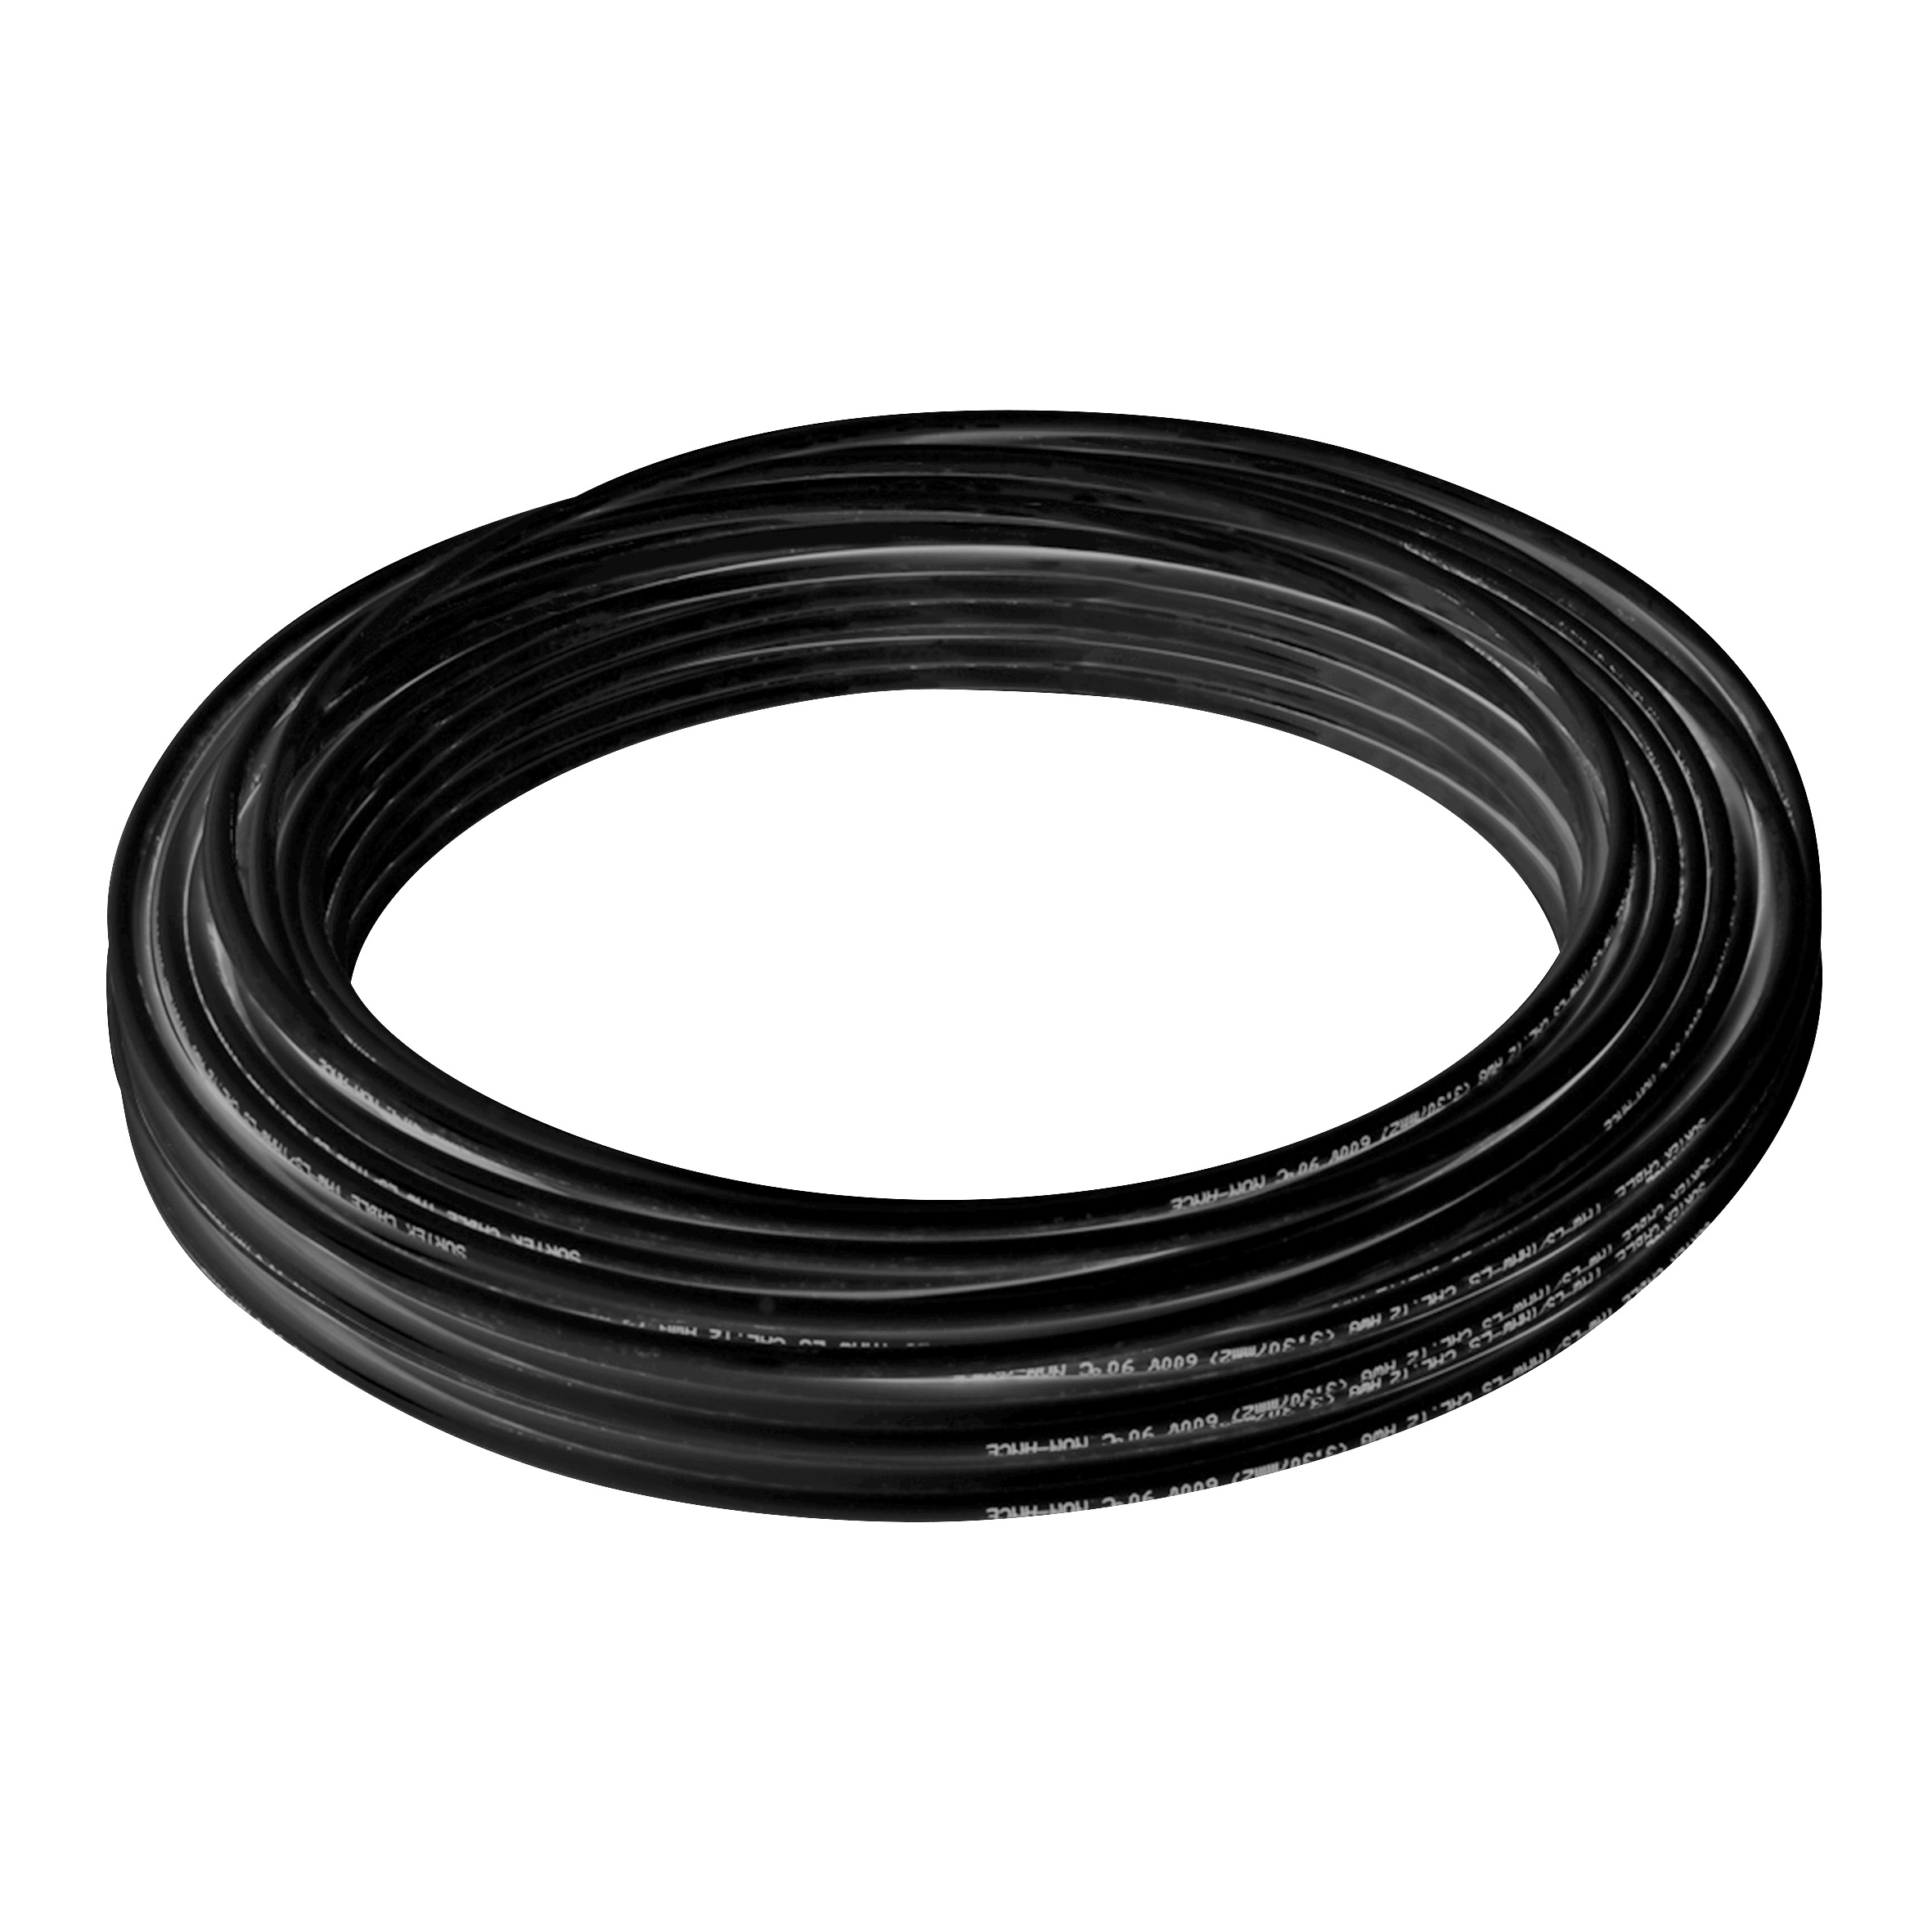 Cable eléctrico tipo THW-LS / THHW-LS Cal.14 100m negro